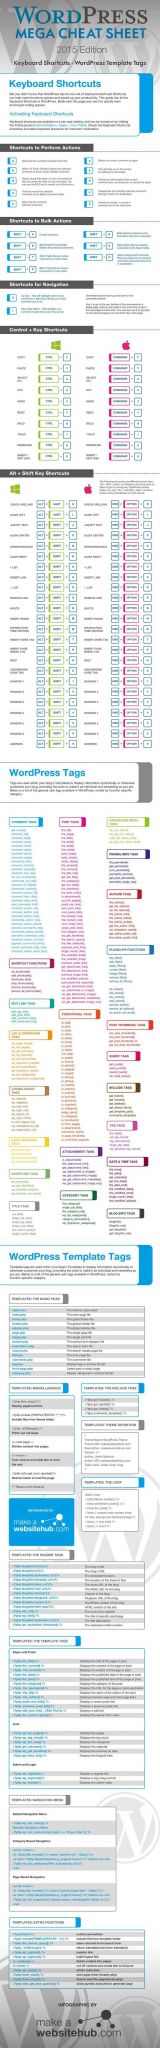 Tax Computation Worksheet 2015 and 222 Best Cheat Sheets for Line Entrepreneurs Images On Pinterest